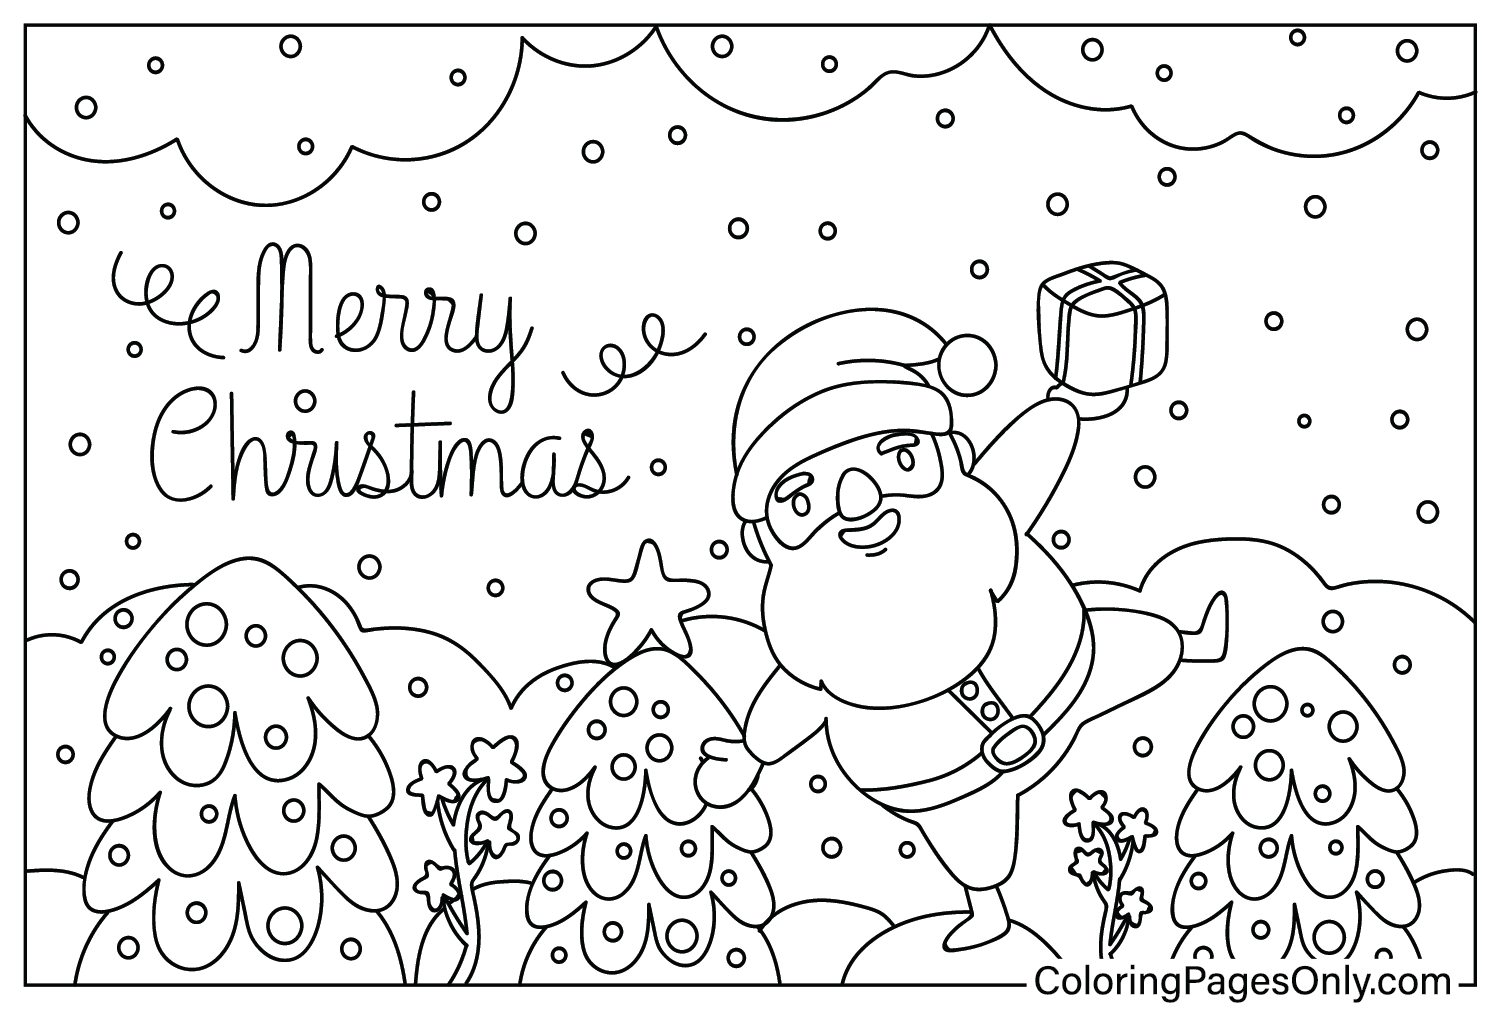 Christmas Wallpaper Free Printable Coloring Page from Christmas Wallpaper